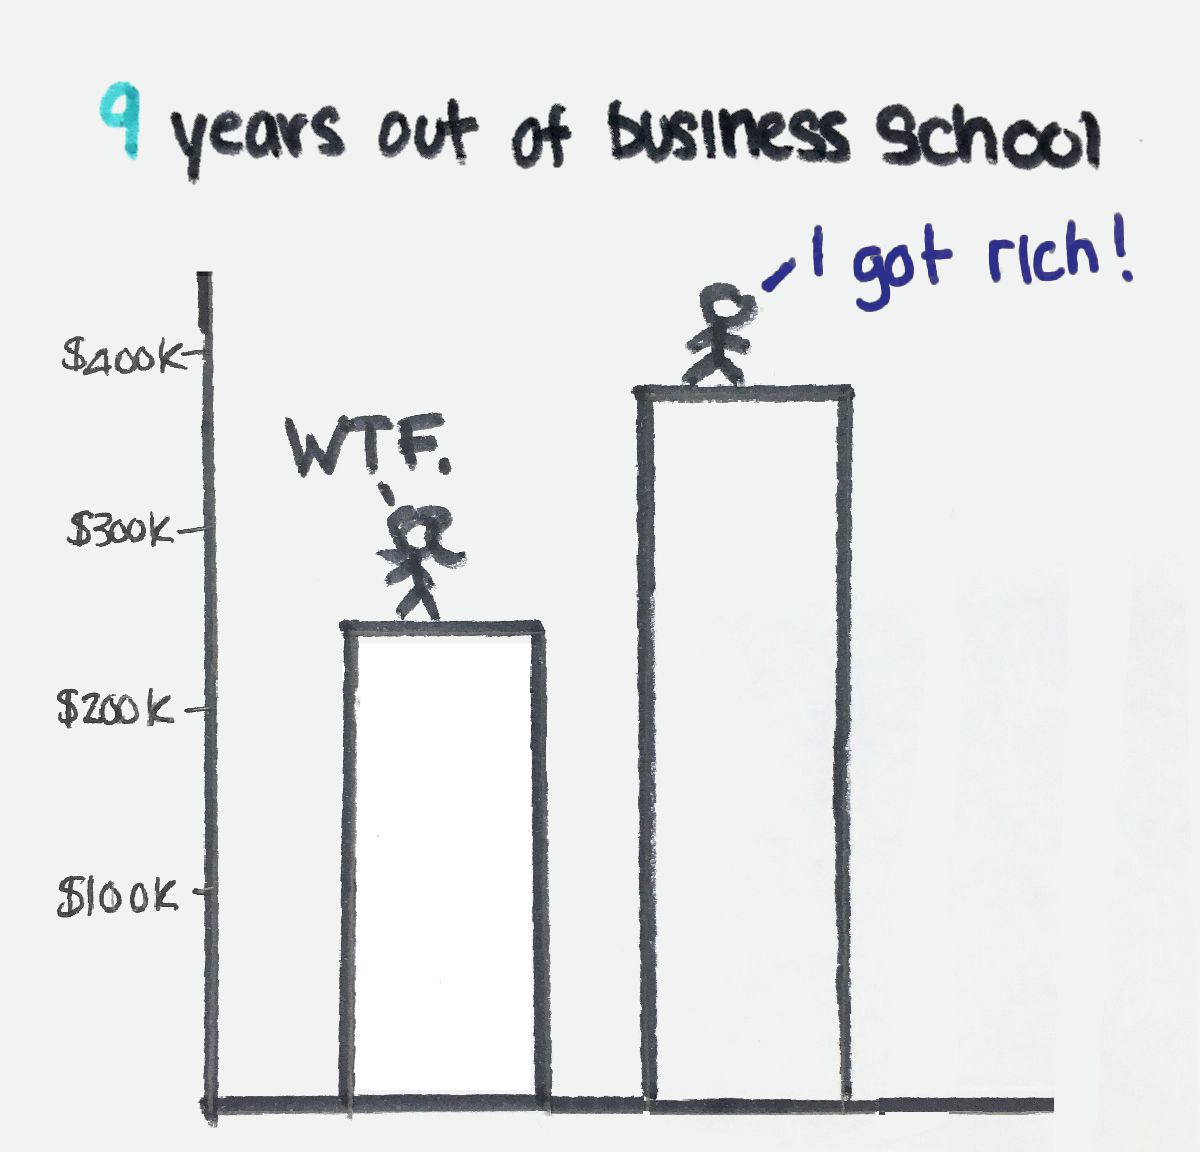 9 years out of business school chart